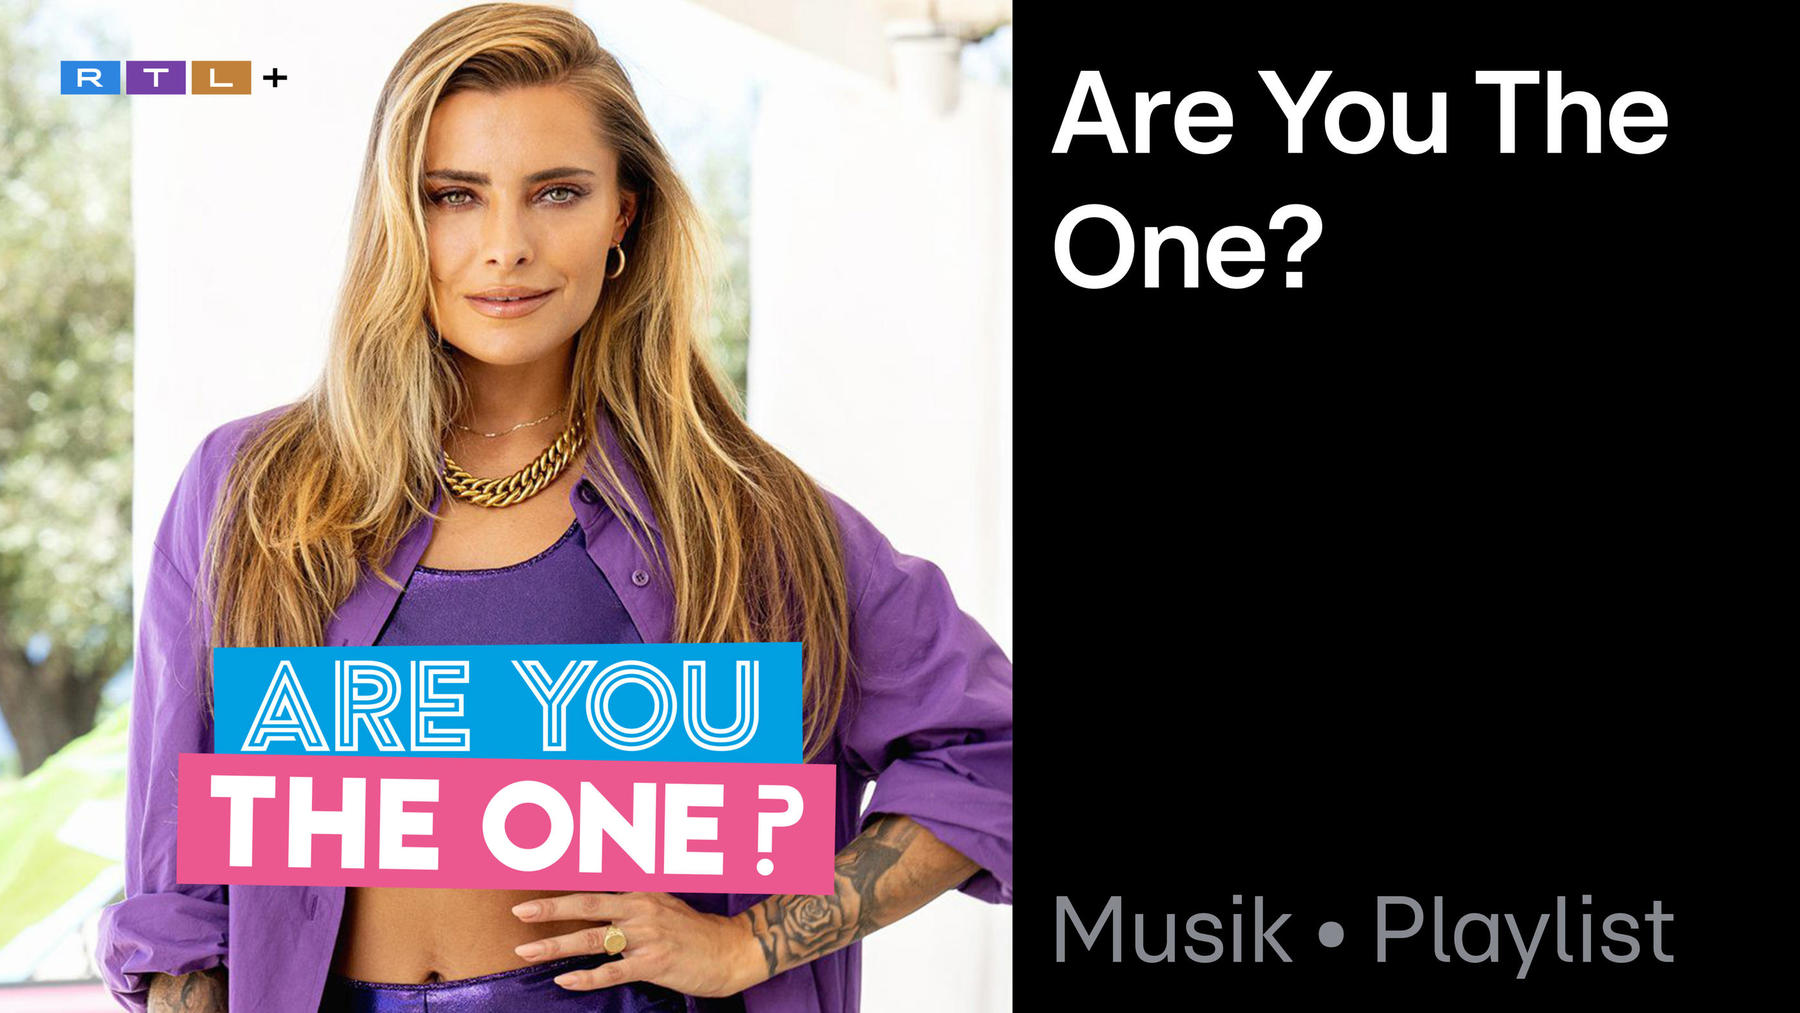 Playlist: Are You The One?